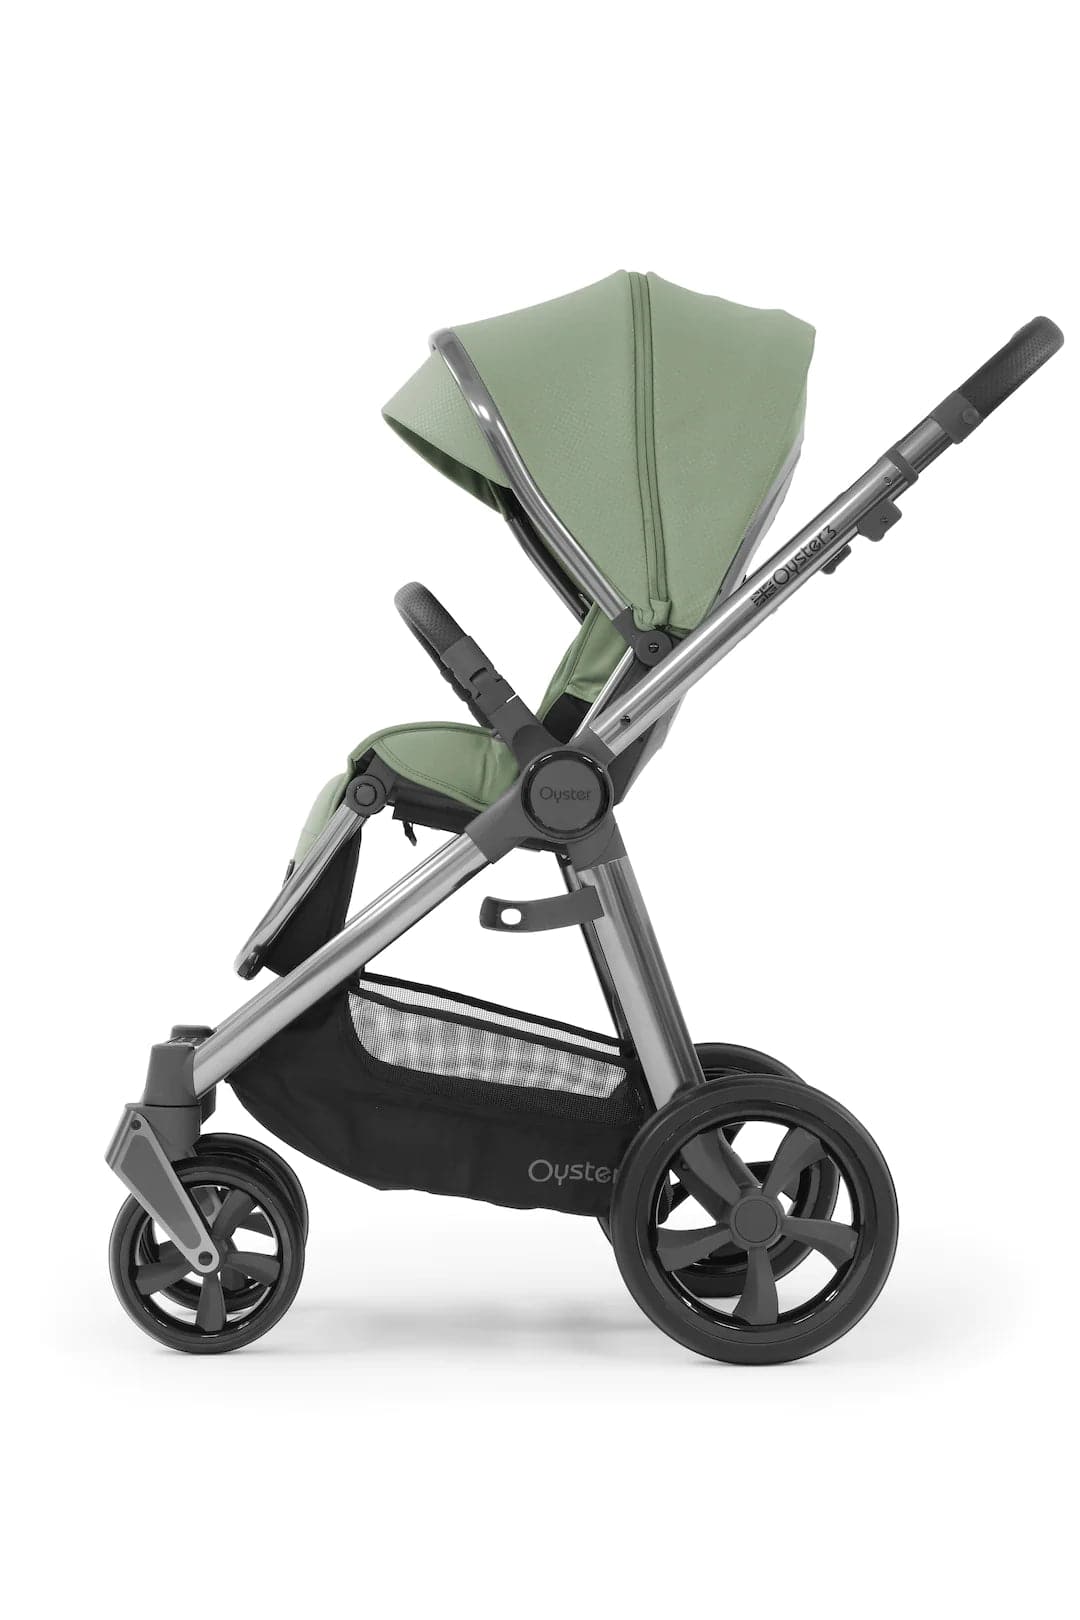 BabyStyle Oyster 3 Pushchair - Spearmint -  | For Your Little One